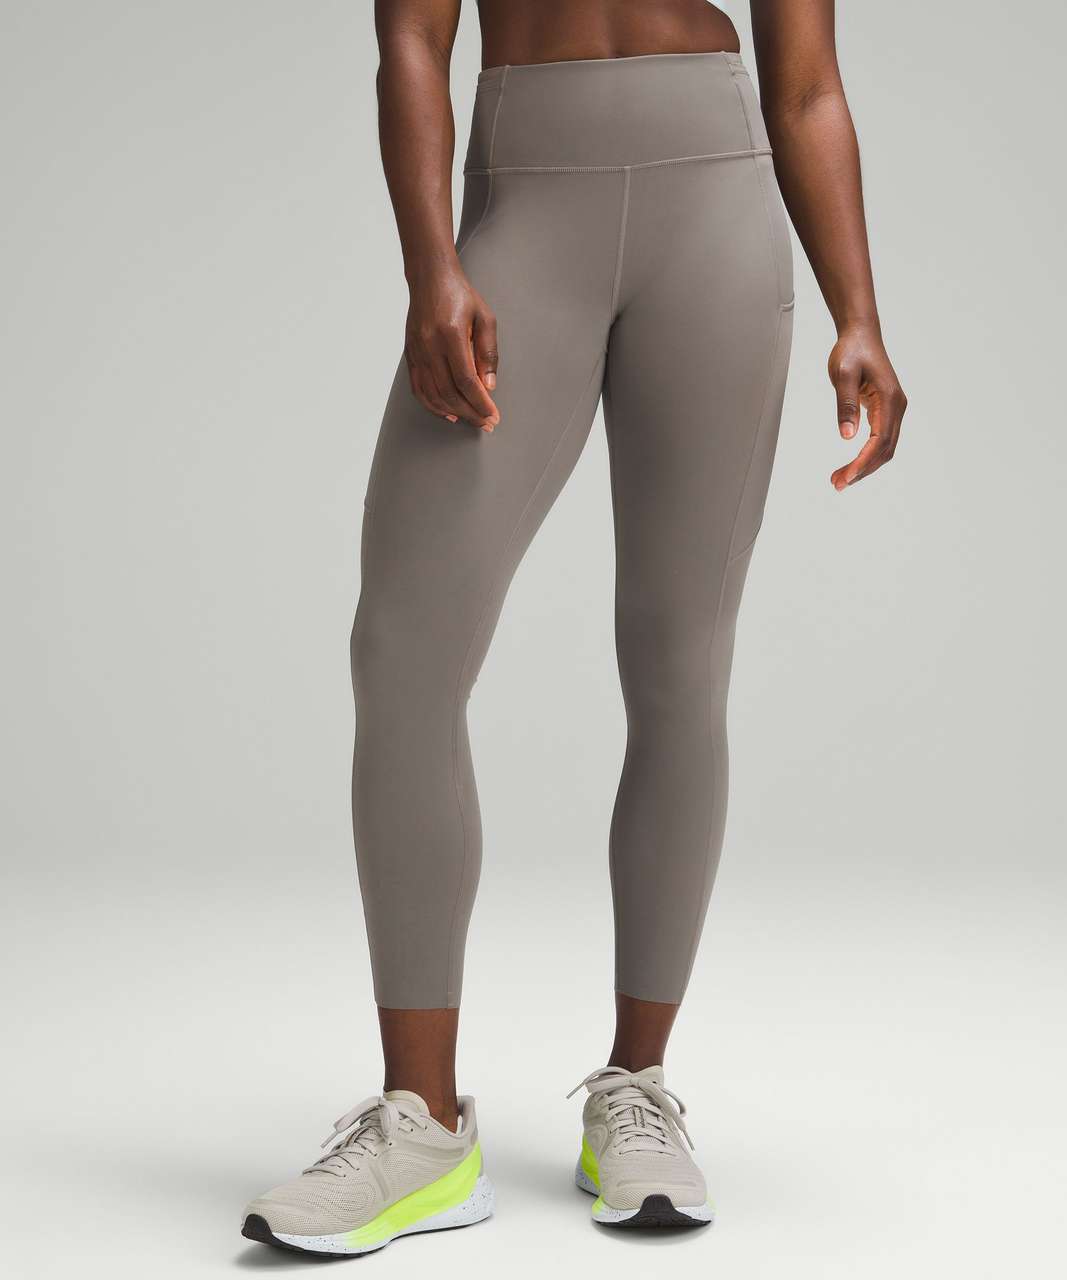 Lululemon athletica Limited Edition Fast and Free High-Rise Tight